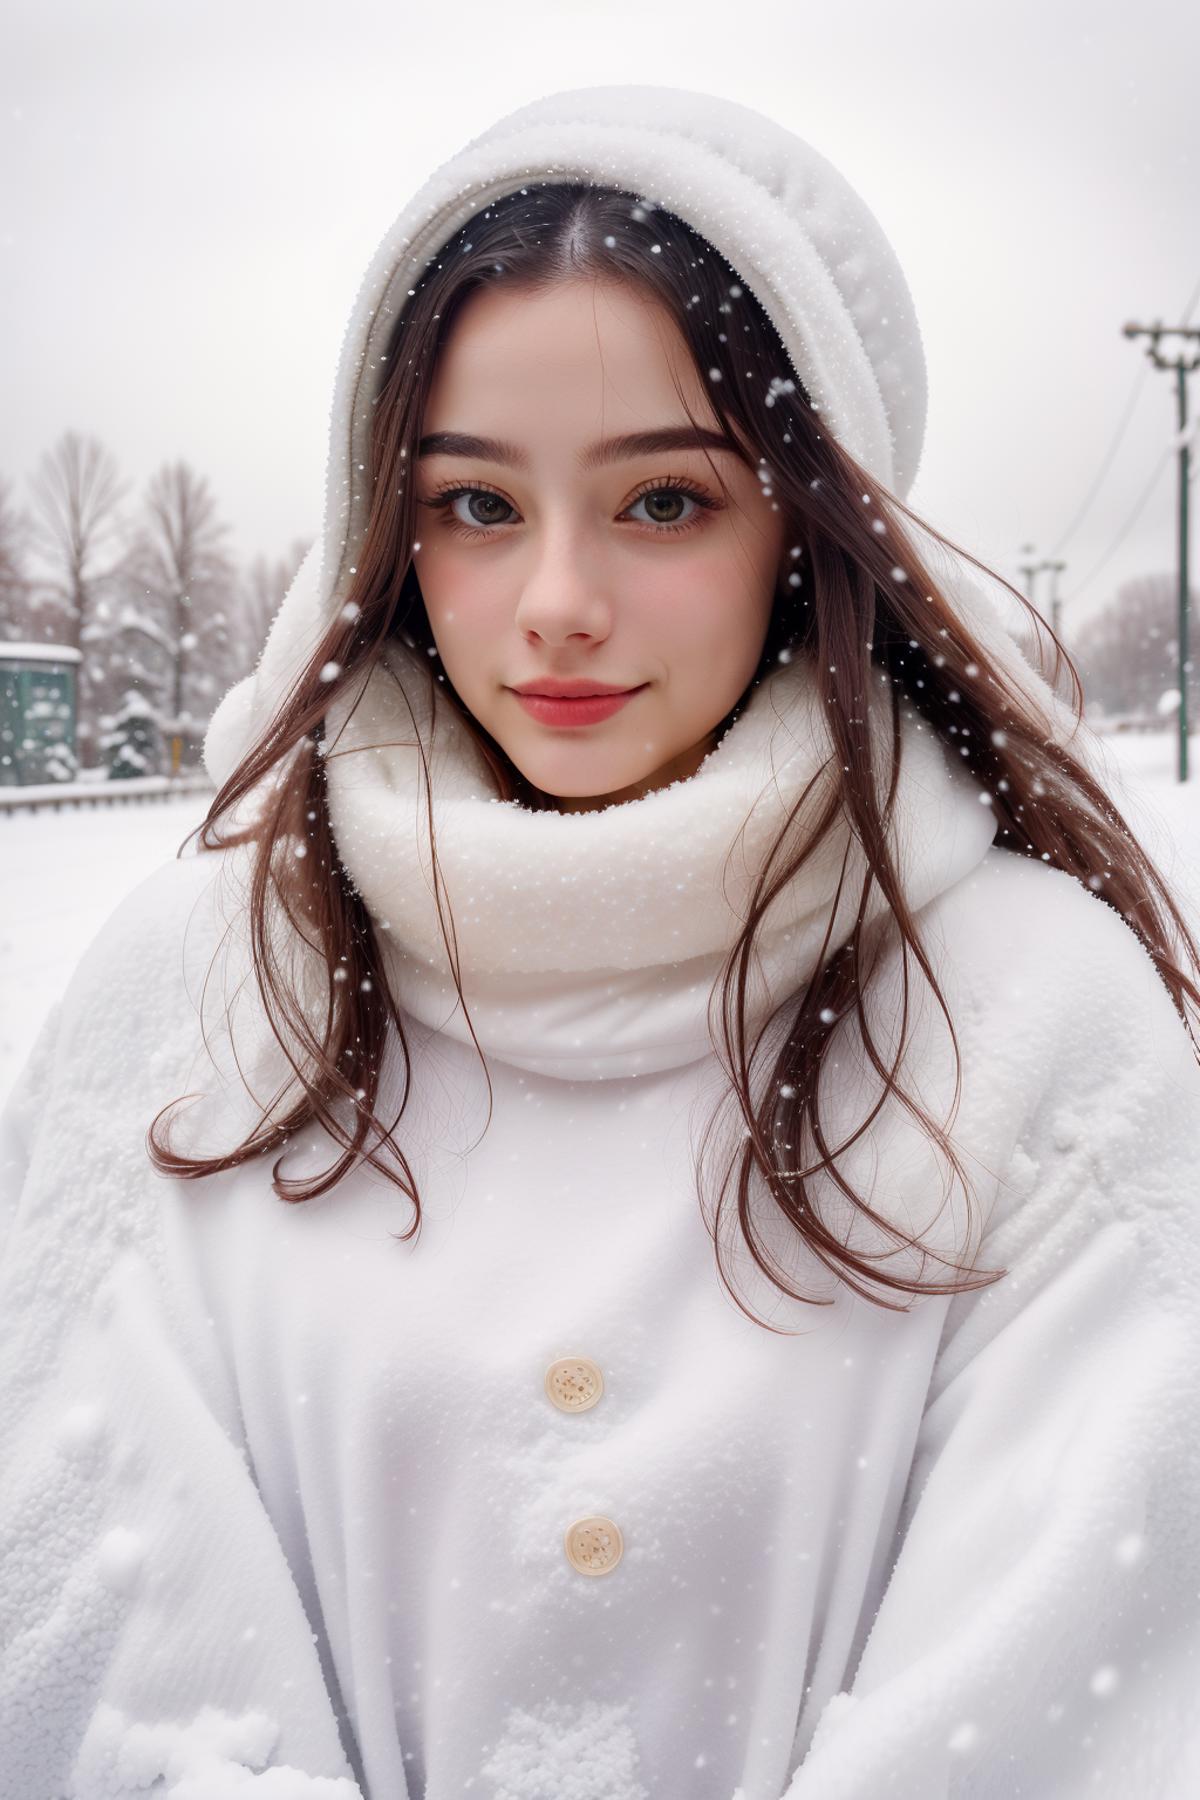 A young woman wearing a white hat and coat with snow falling around her.